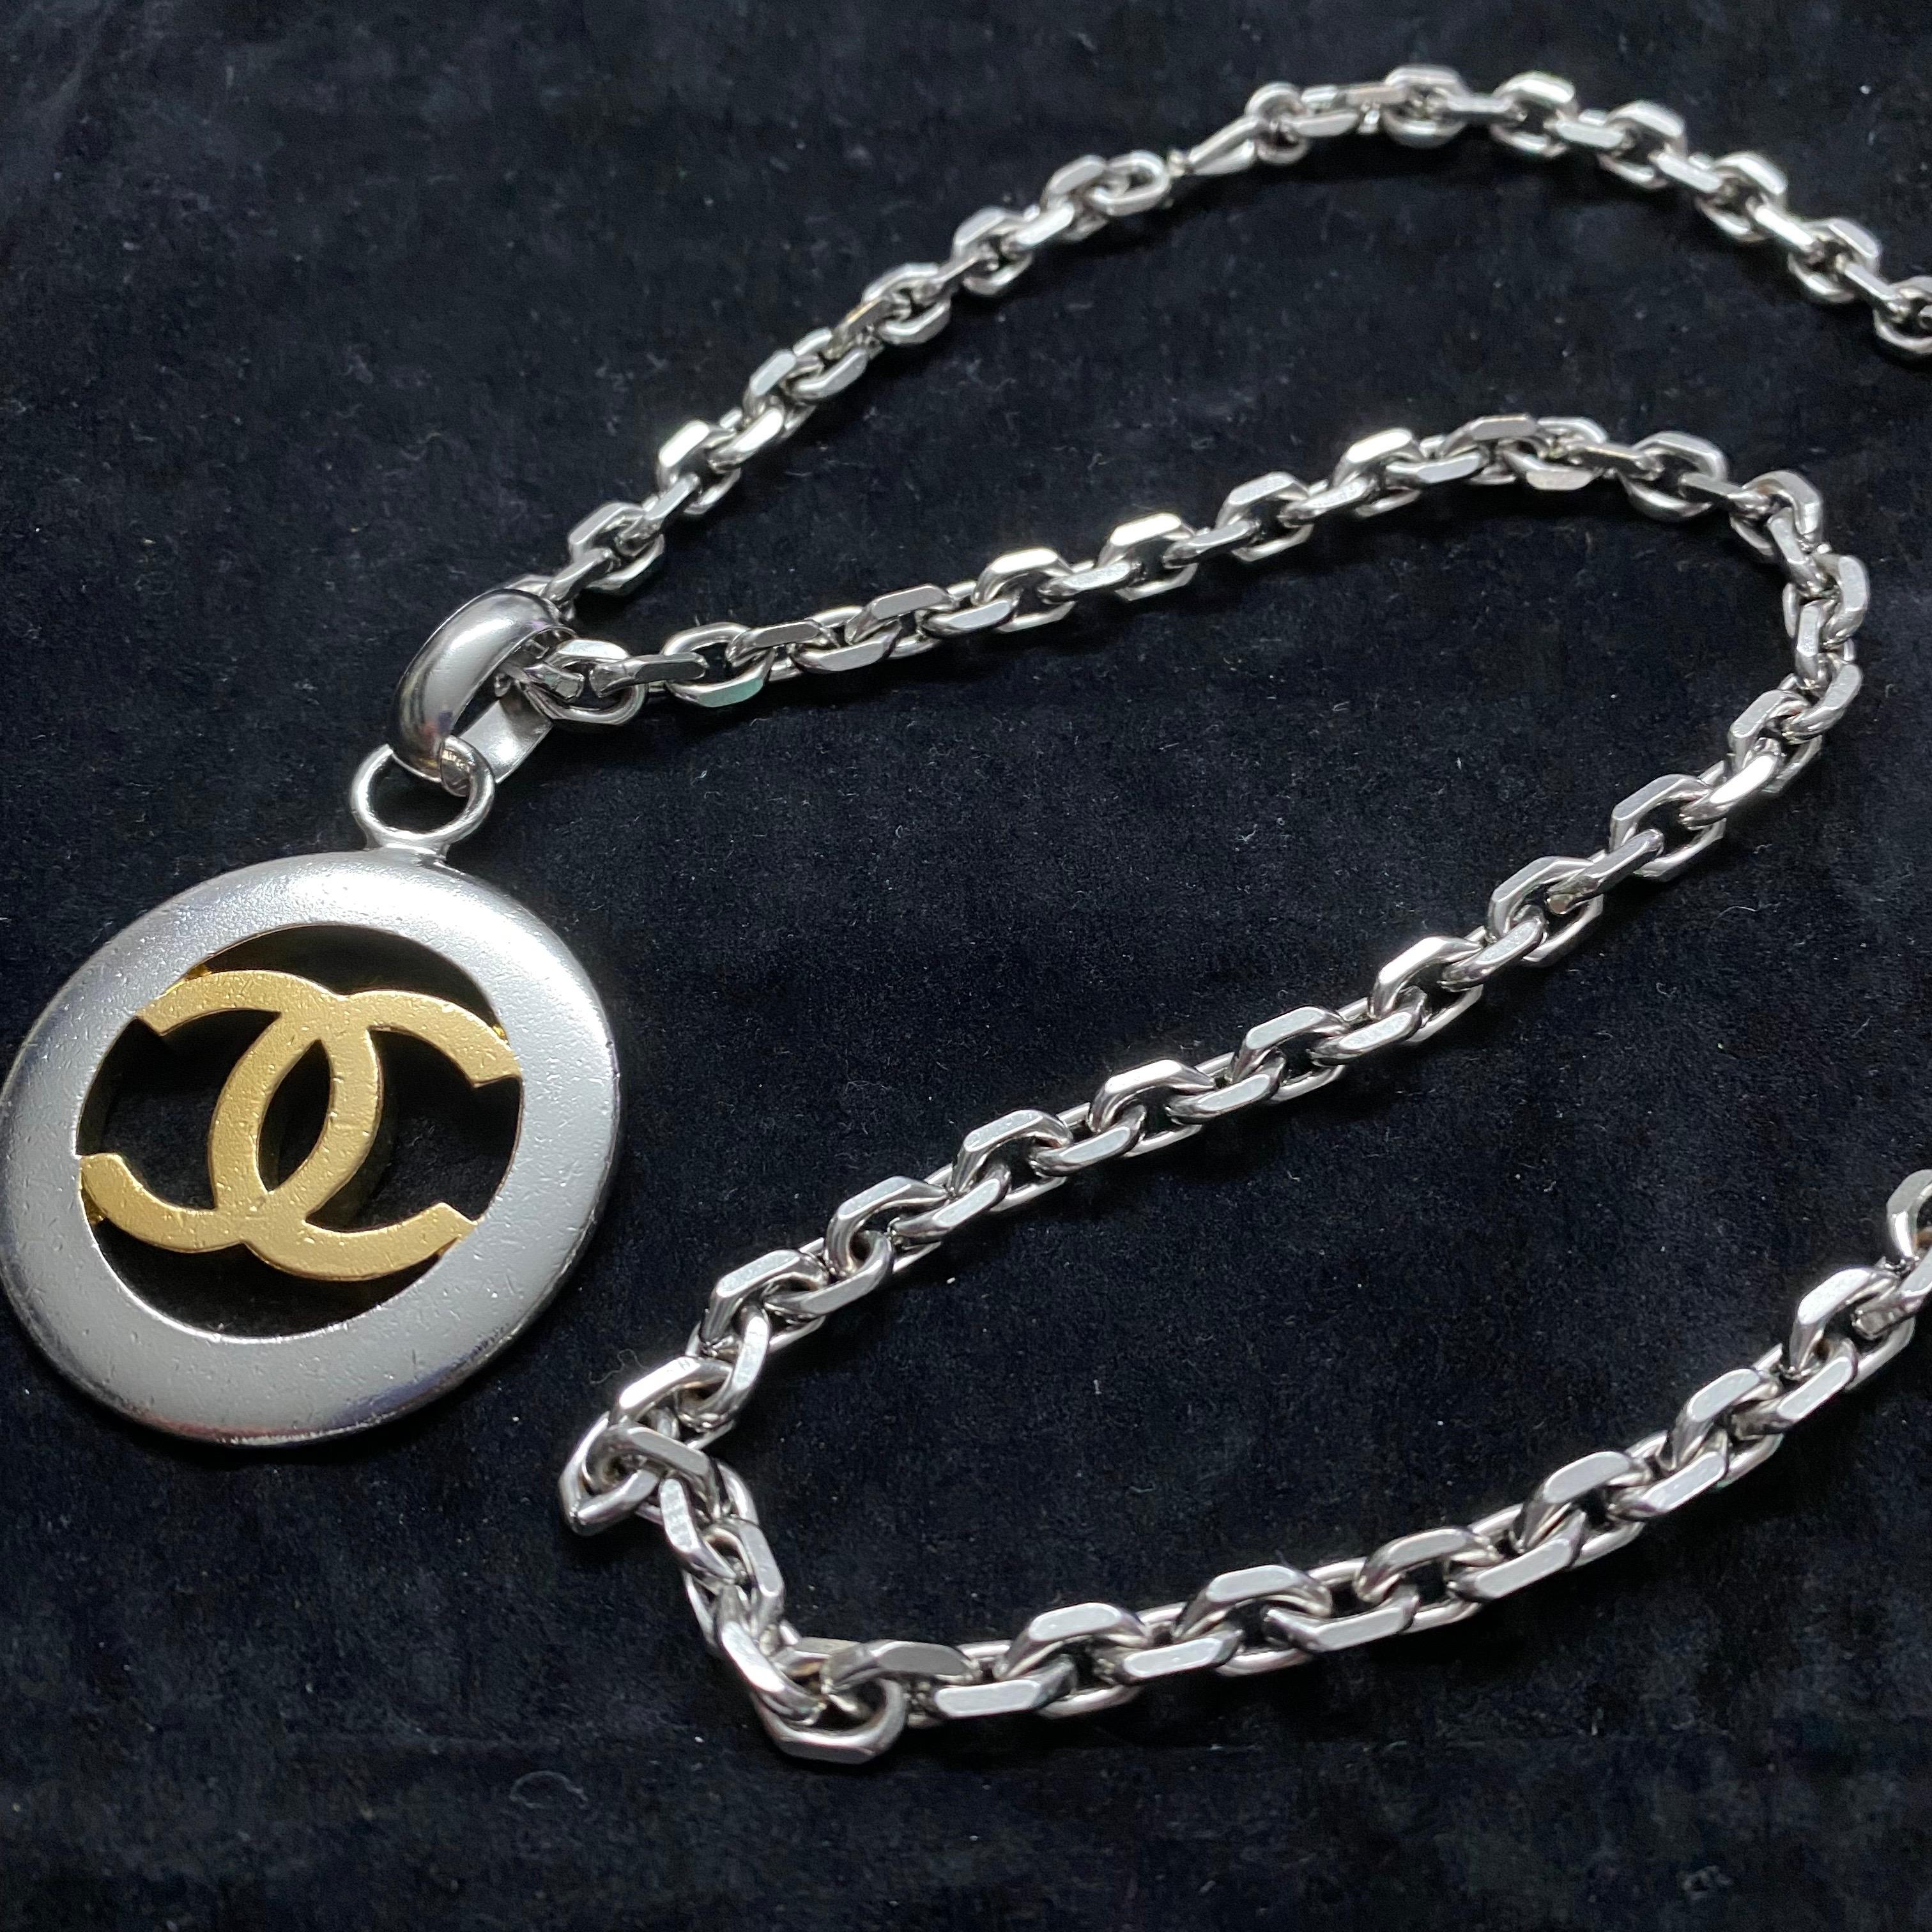 Women's Chanel Vintage -  Necklace with CC pendant in Gold and Silver coated Metal